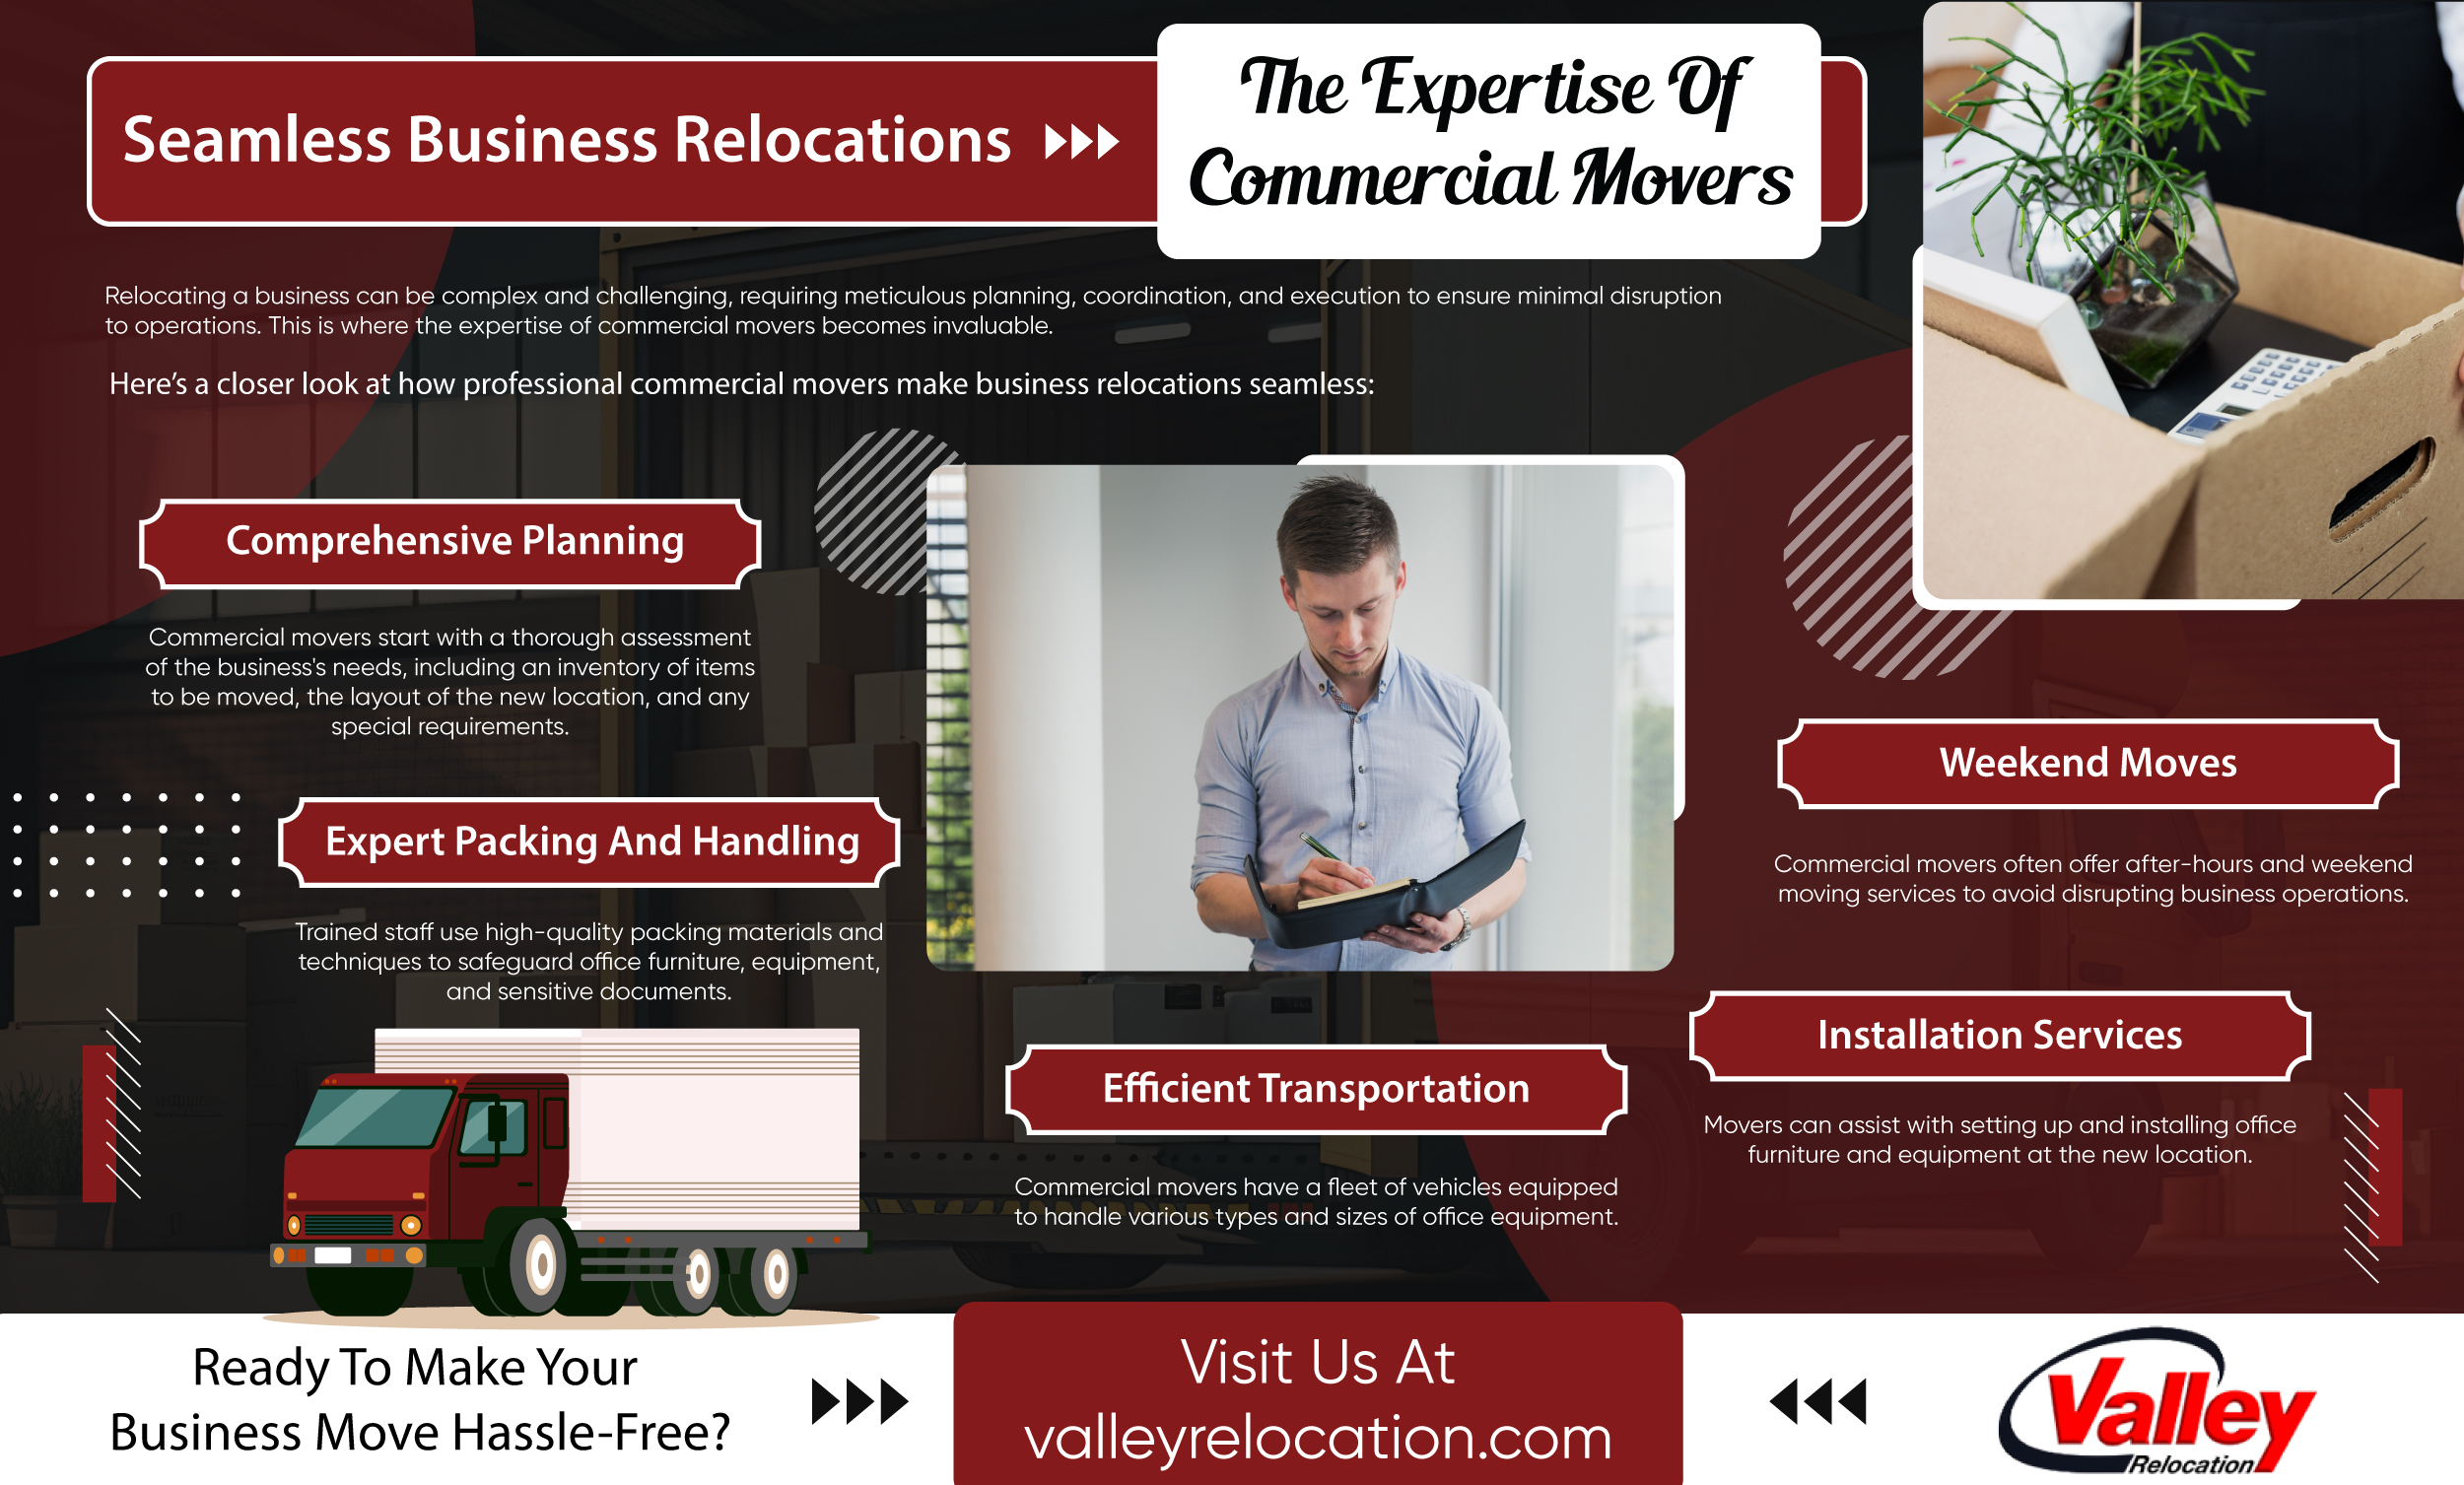 Seamless Business Relocations The Expertise Of Commercial Movers